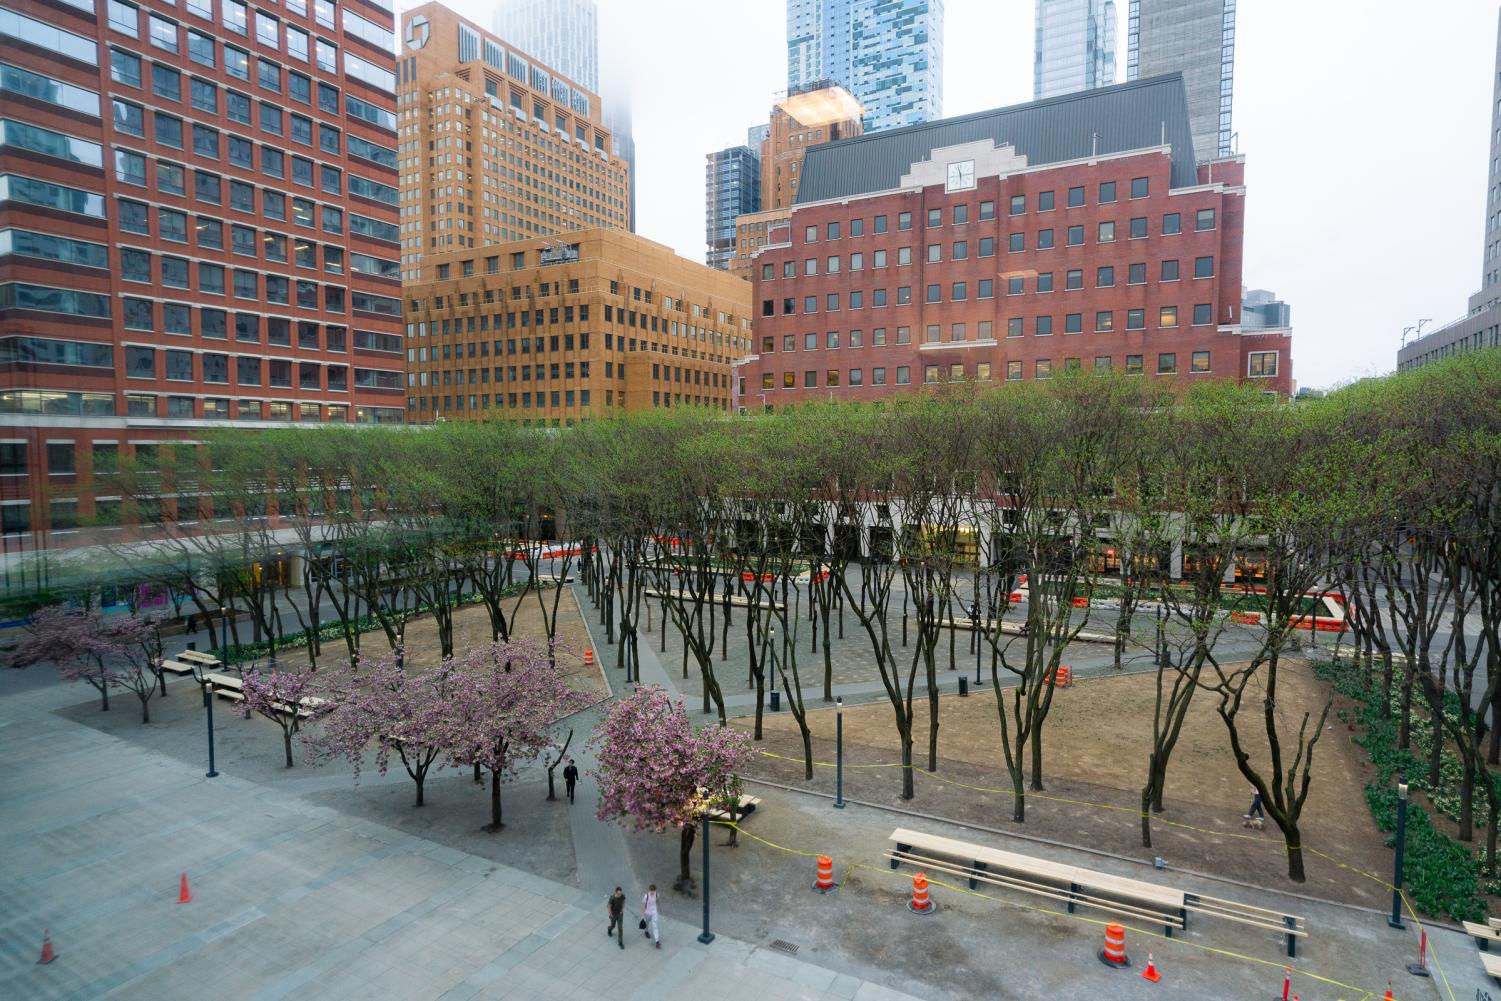 A small park appears nestled between various MetroTech buildings. The buildings share similar architectural styles of warm-toned facades and a surplus of small windows. The photo is an aerial shot.